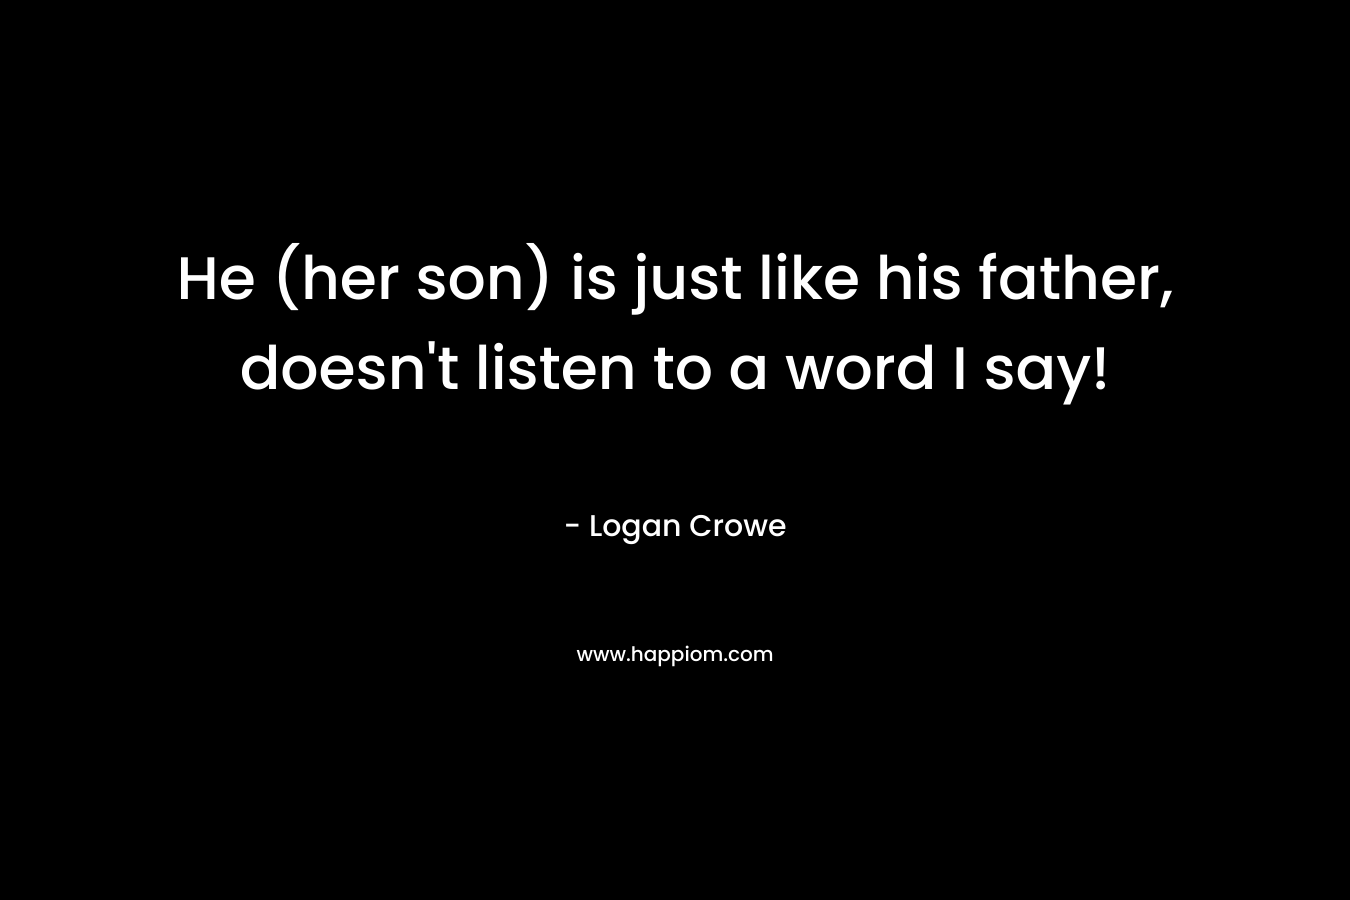 He (her son) is just like his father, doesn’t listen to a word I say! – Logan Crowe